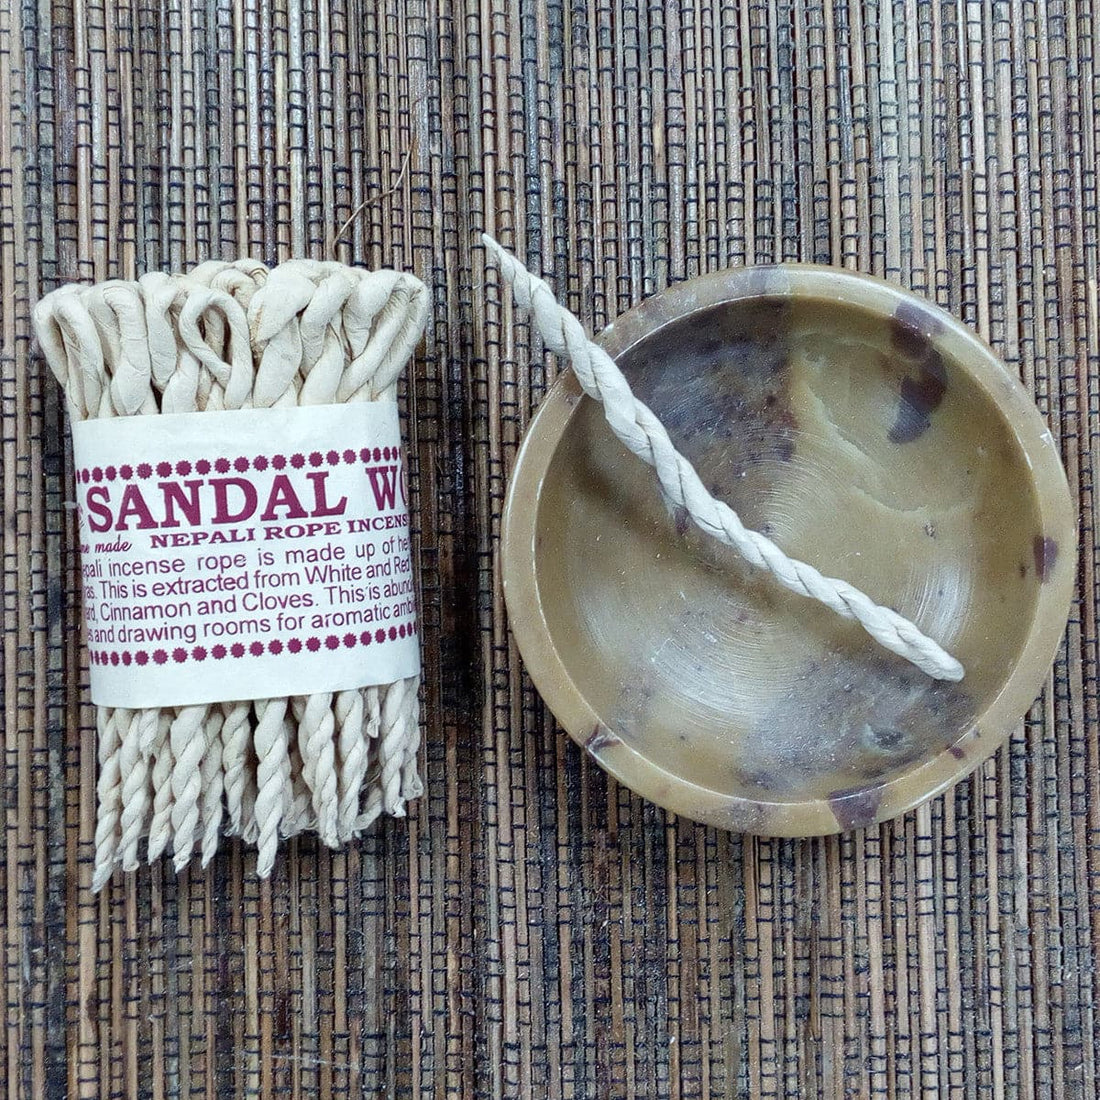 Pure Herbs Sandalwood & Spice Rope Incense - best price from Maltashopper.com ROPEI-03